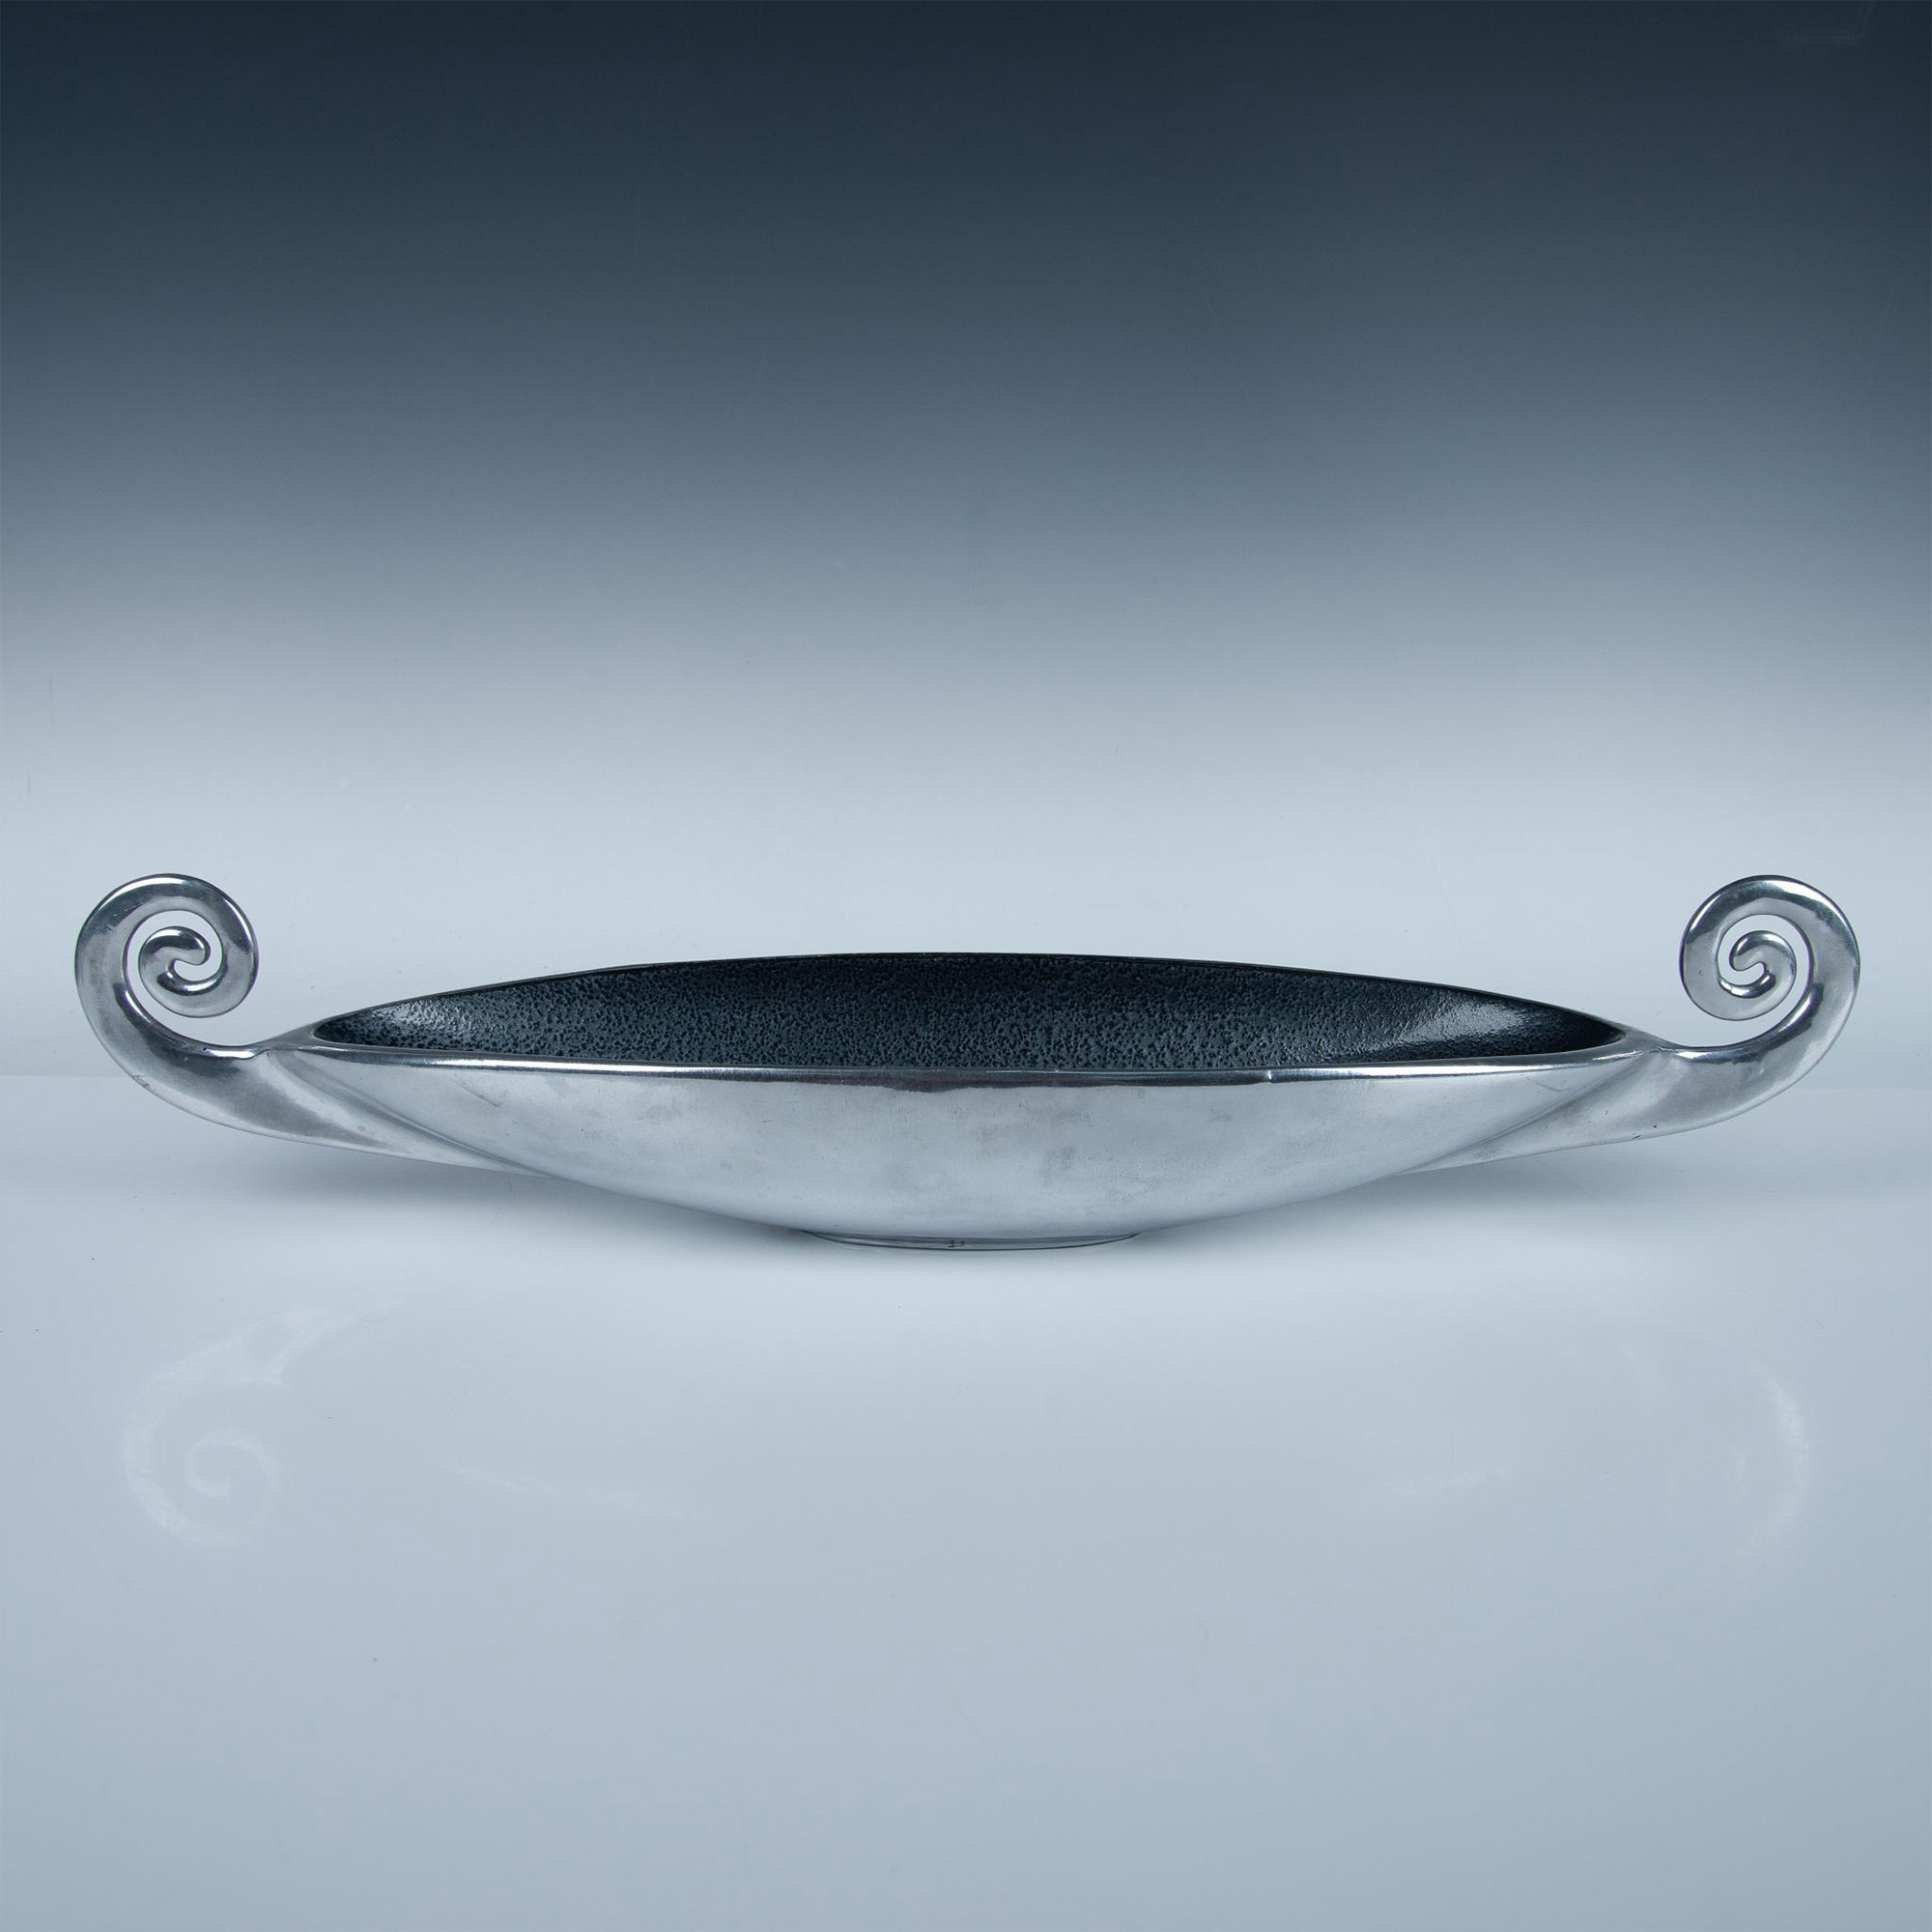 Carrol Boyes Aluminum Double Handle Serving Tray, Spirals - Image 3 of 5